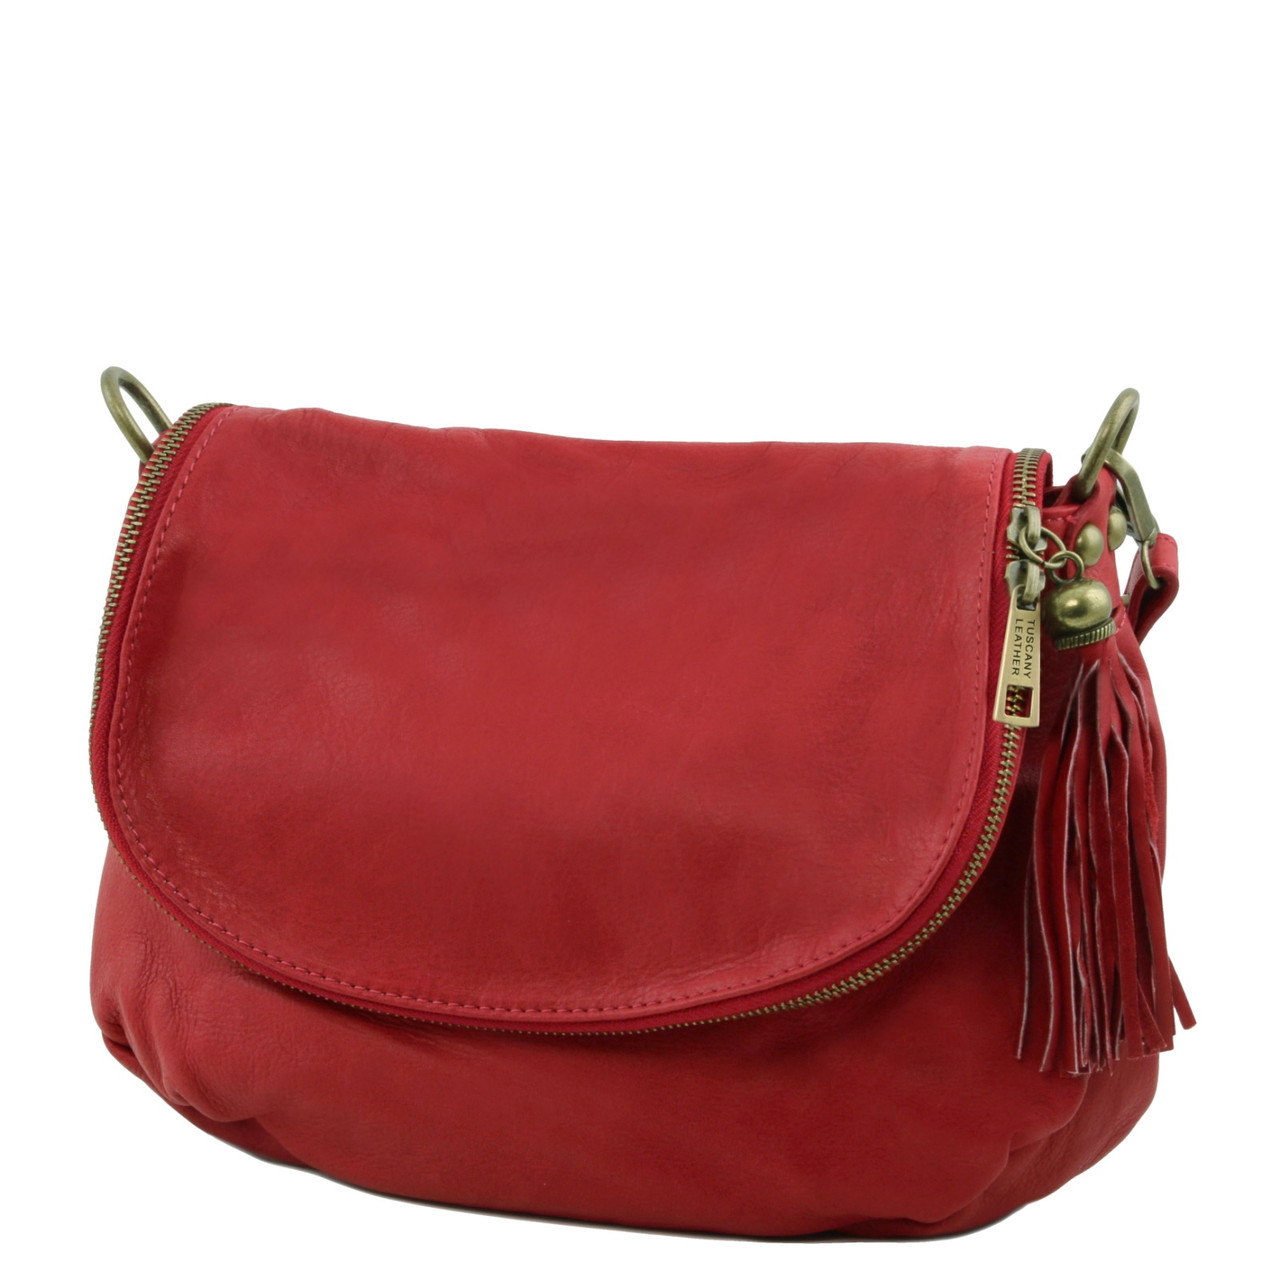 Tuscany Leather TL Bag - Handbag in ostrich-print leather Colour Red